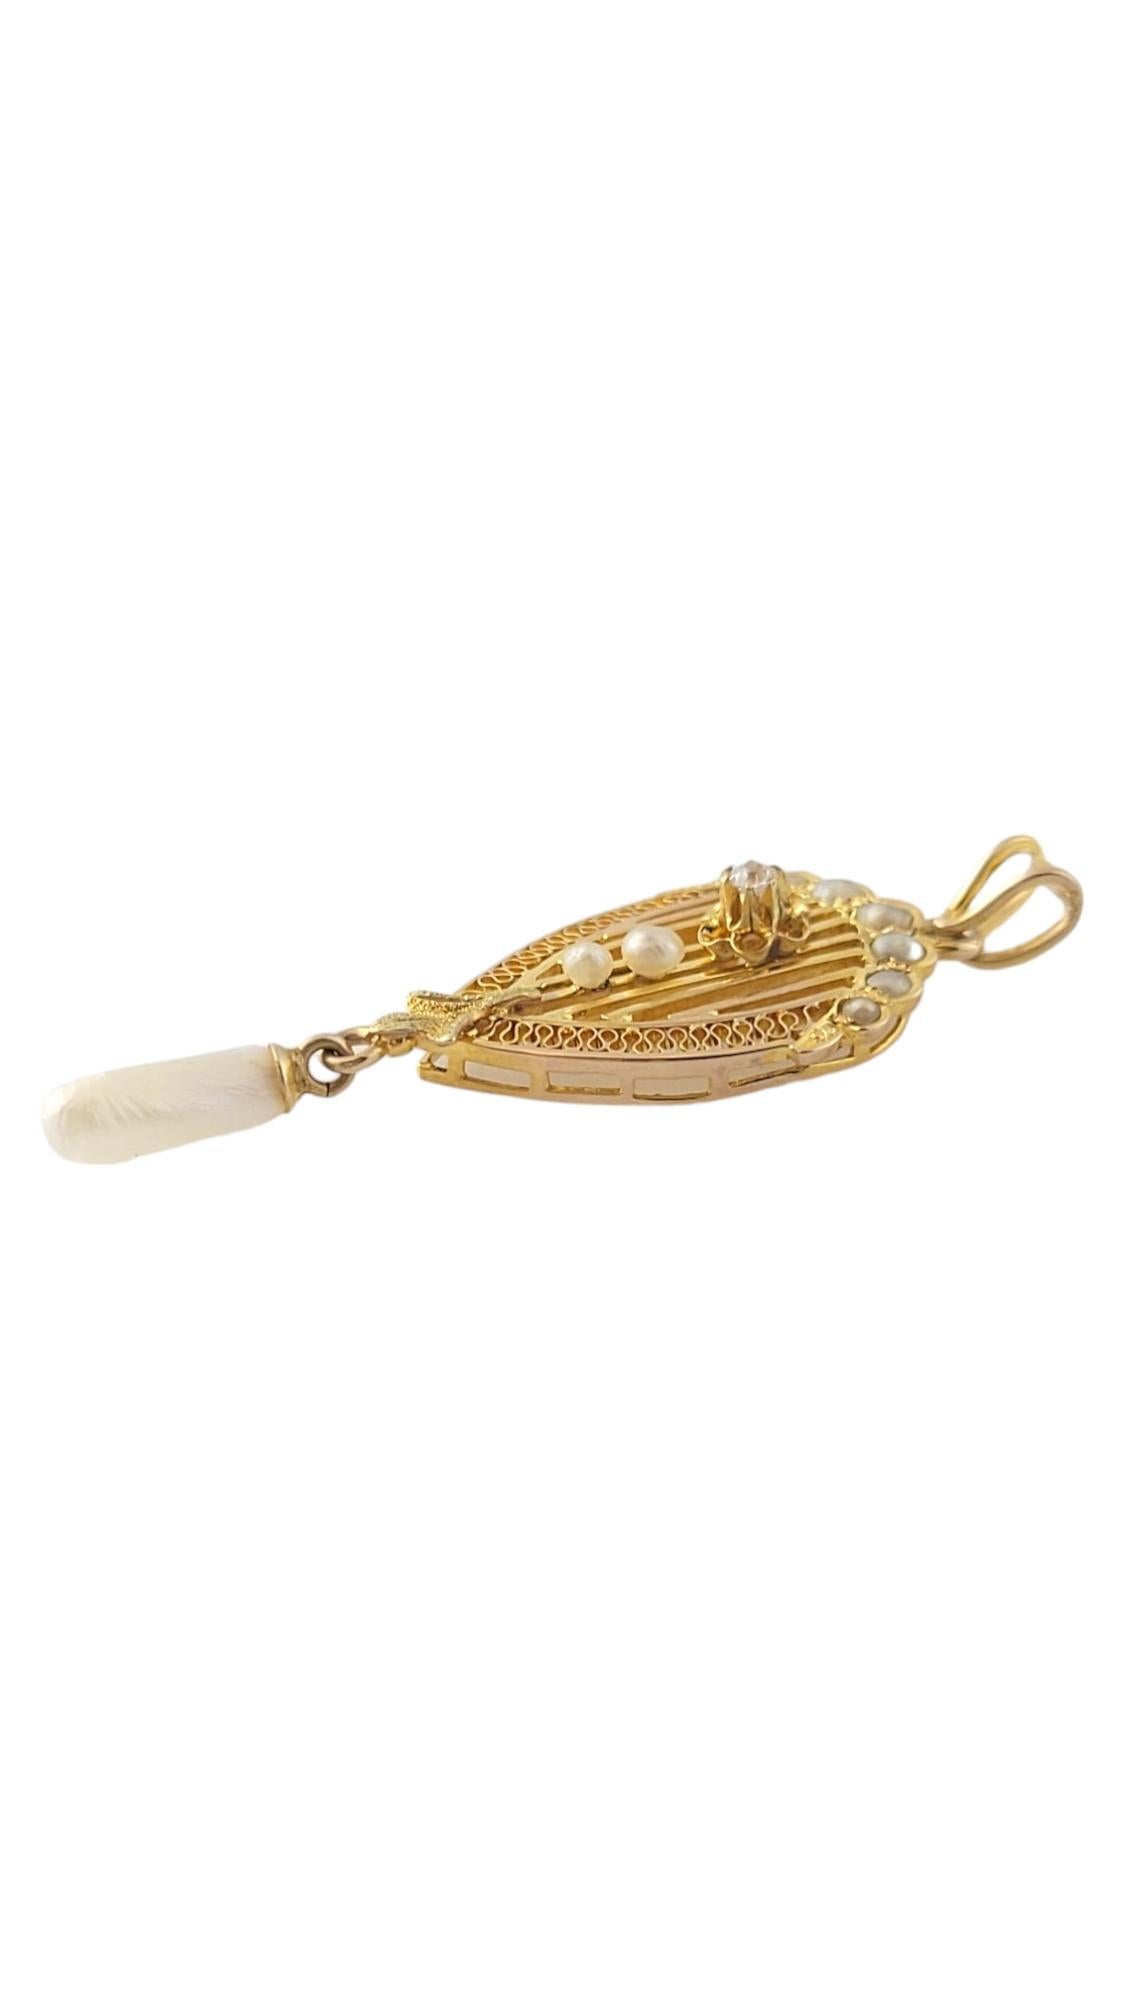 Vintage 10K Yellow Gold Pearl & Diamond Pendant

This gorgeous pendant has 9 beautiful pearls as well as one breath taking mother of pearl dangle. In the centter, the pendant is decorated with a sparkling old mine cut diamond to tie the piece